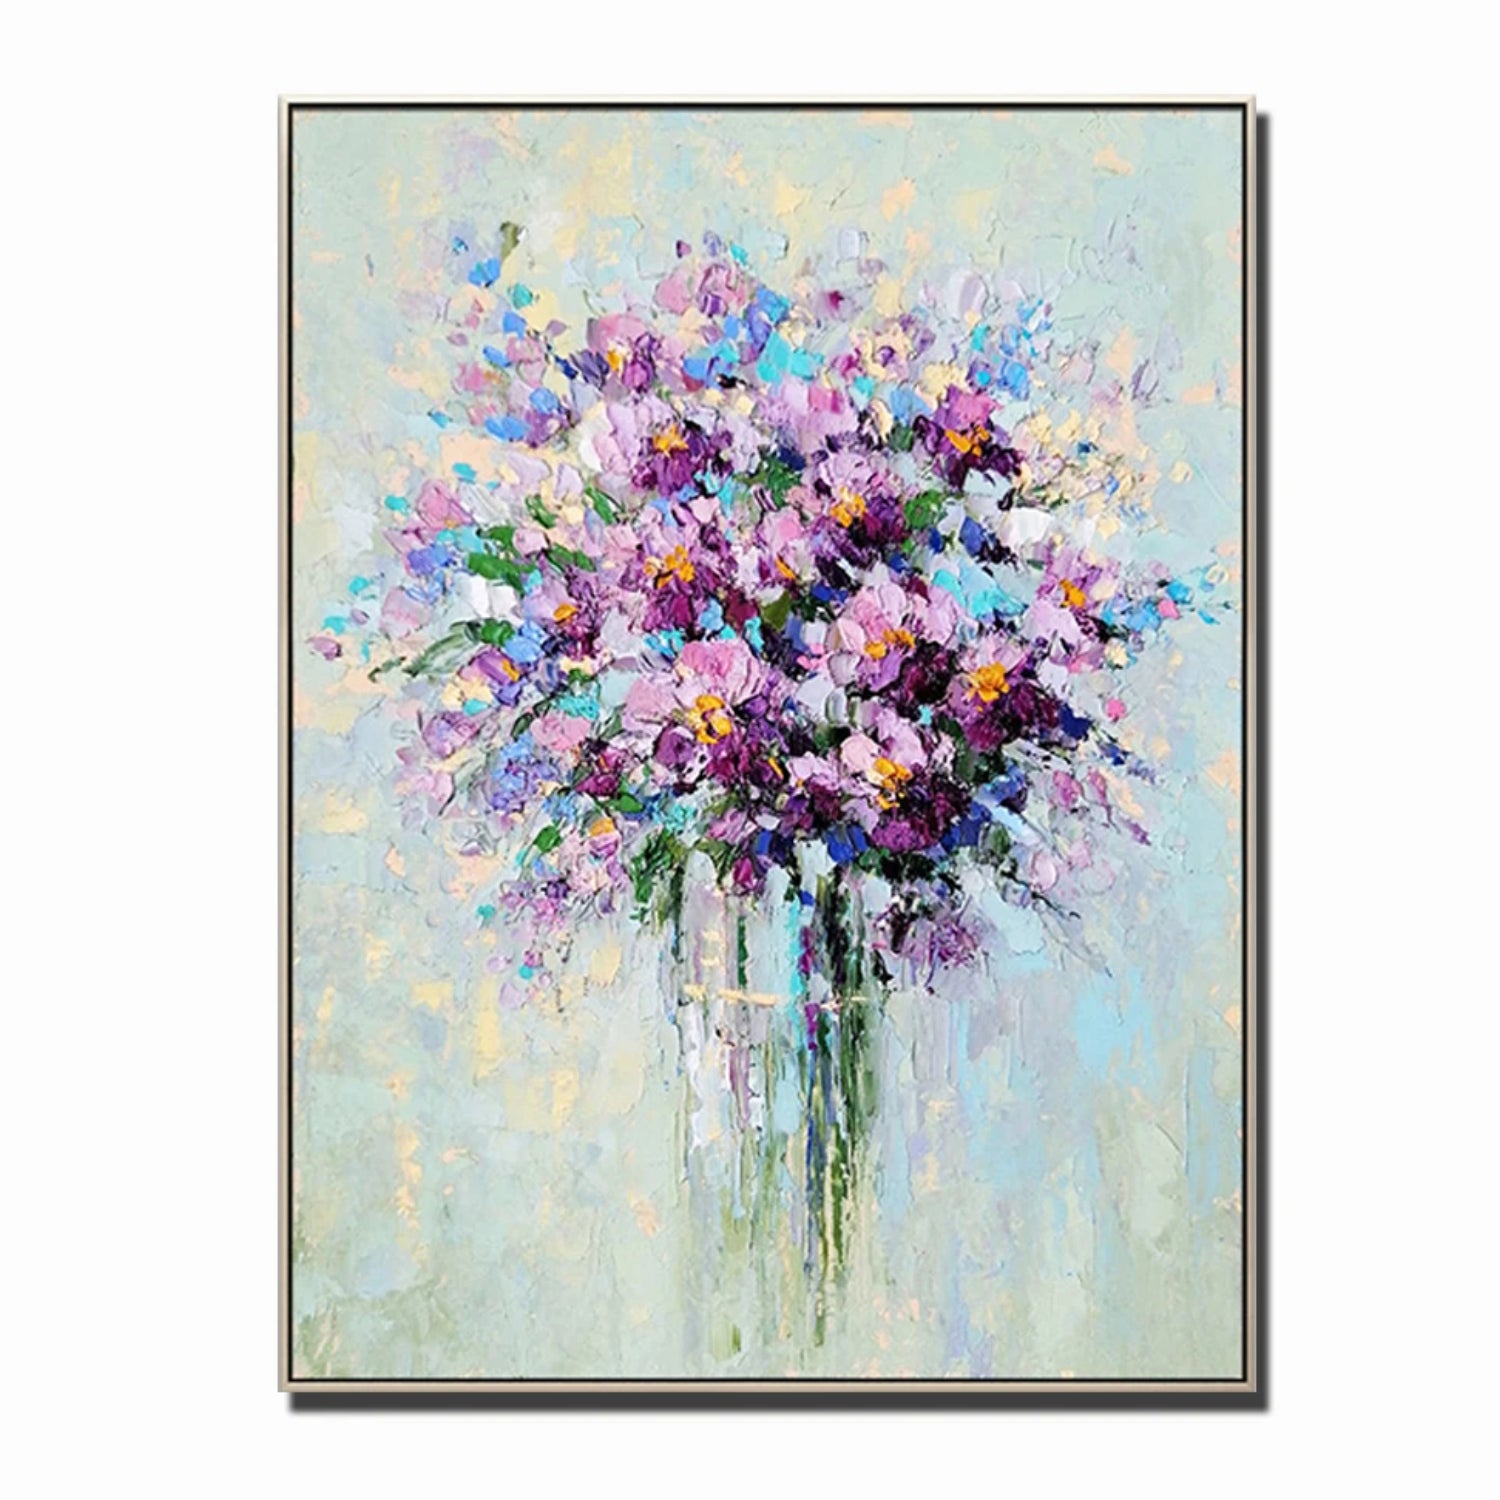 Colourful Textured Floral Bouquet Impressionist Wall Art